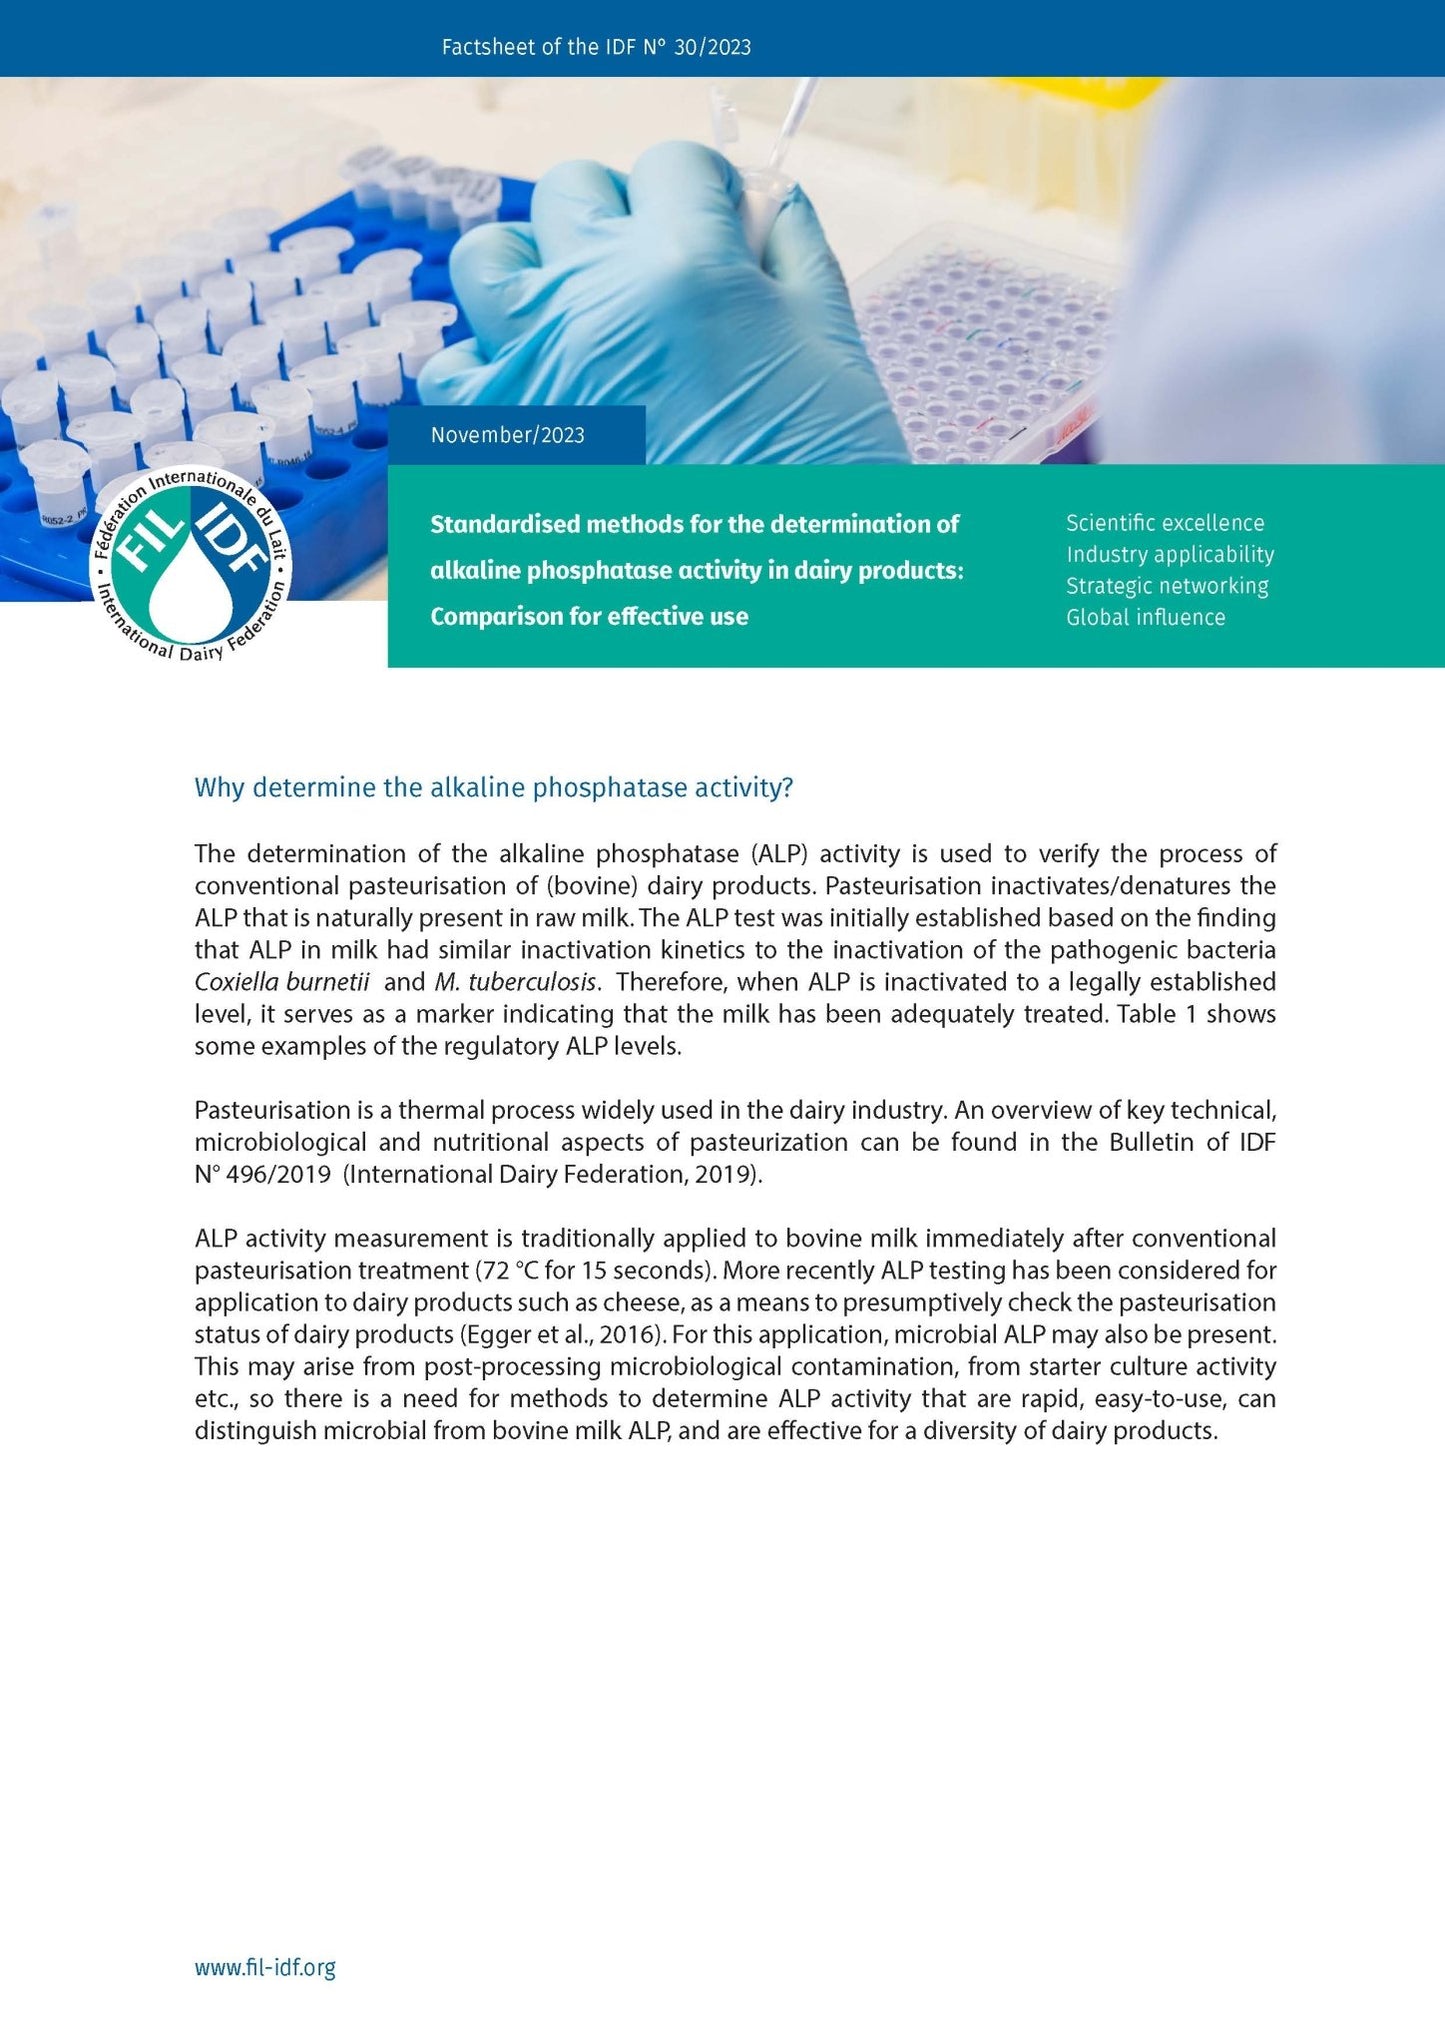 Factsheet of the IDF N° 30/2023: Standardized methods for the determination of alkaline phosphatase activity in dairy products: Comparison for effective use - FIL-IDF